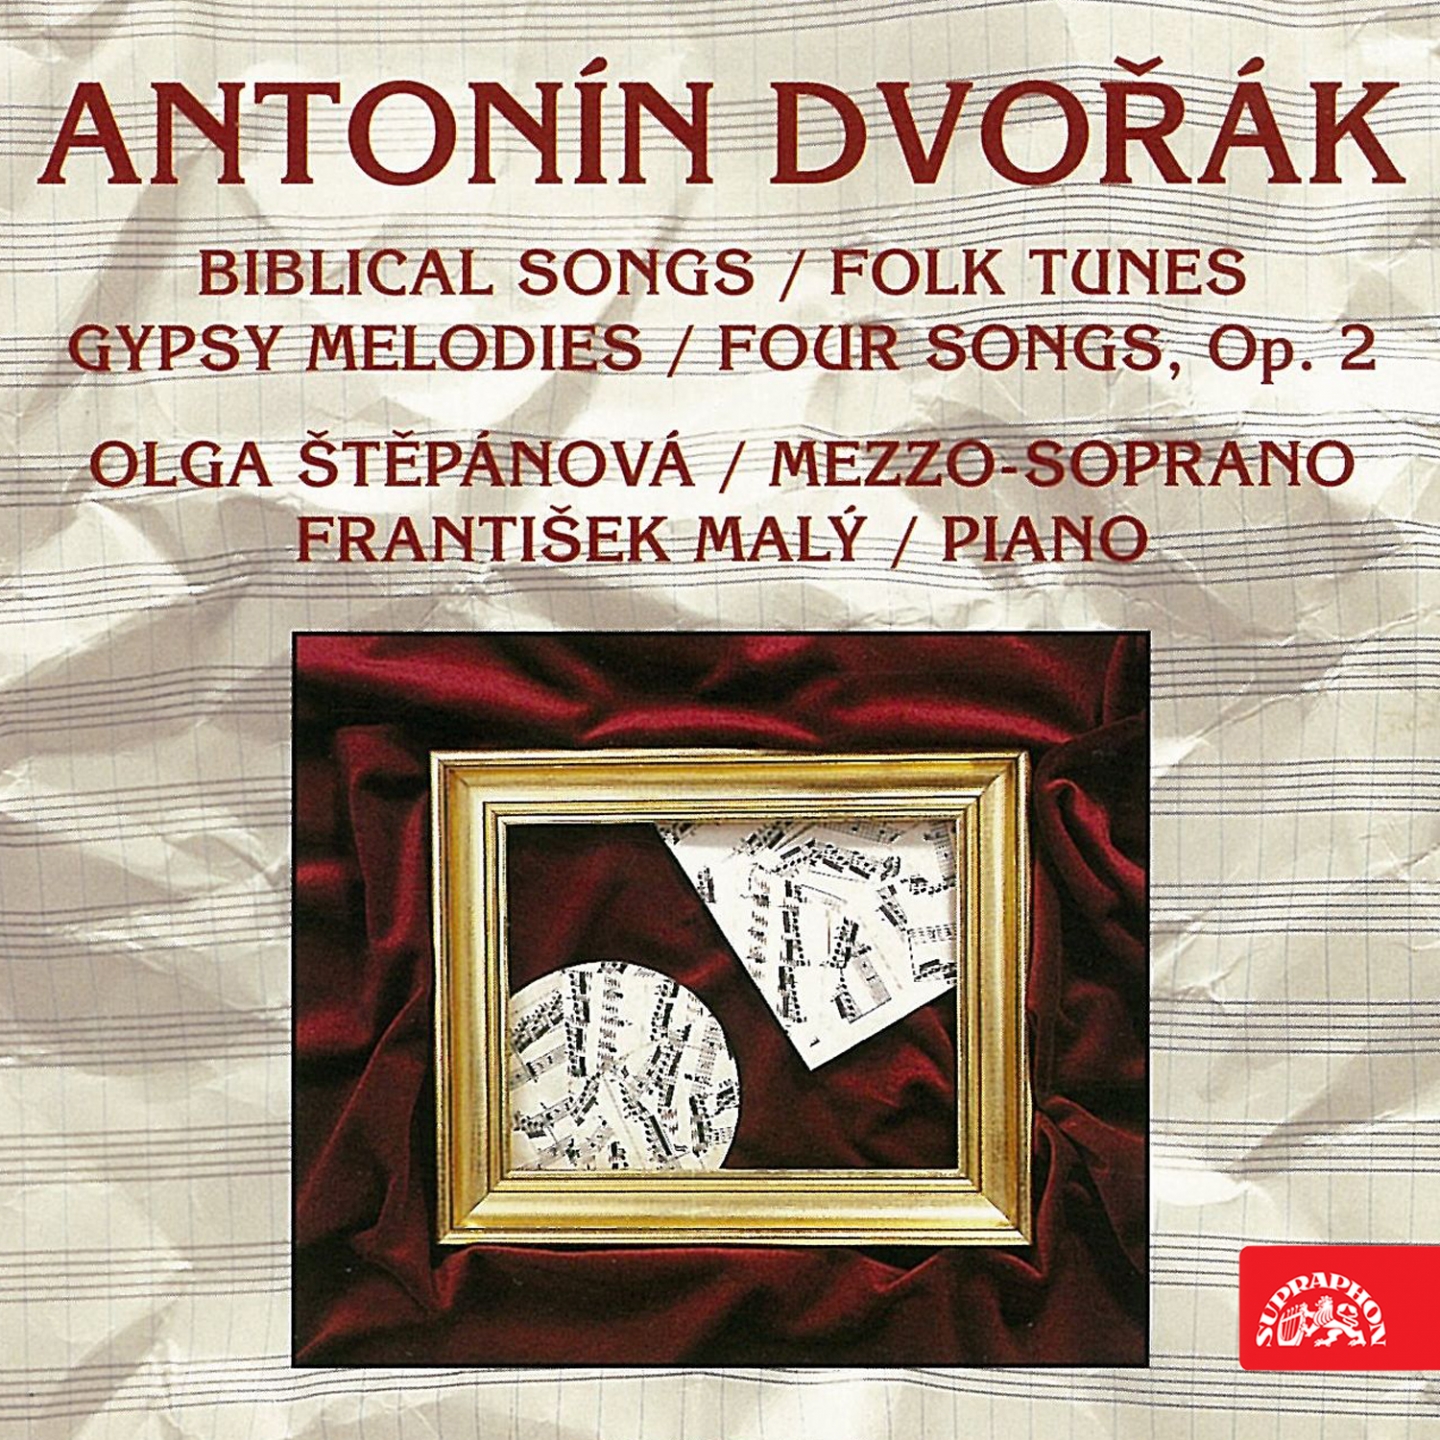 Gypsy Songs, Op. 55, .: Strange, but When My Old Mother Taught Me to Sing. Andante con moto